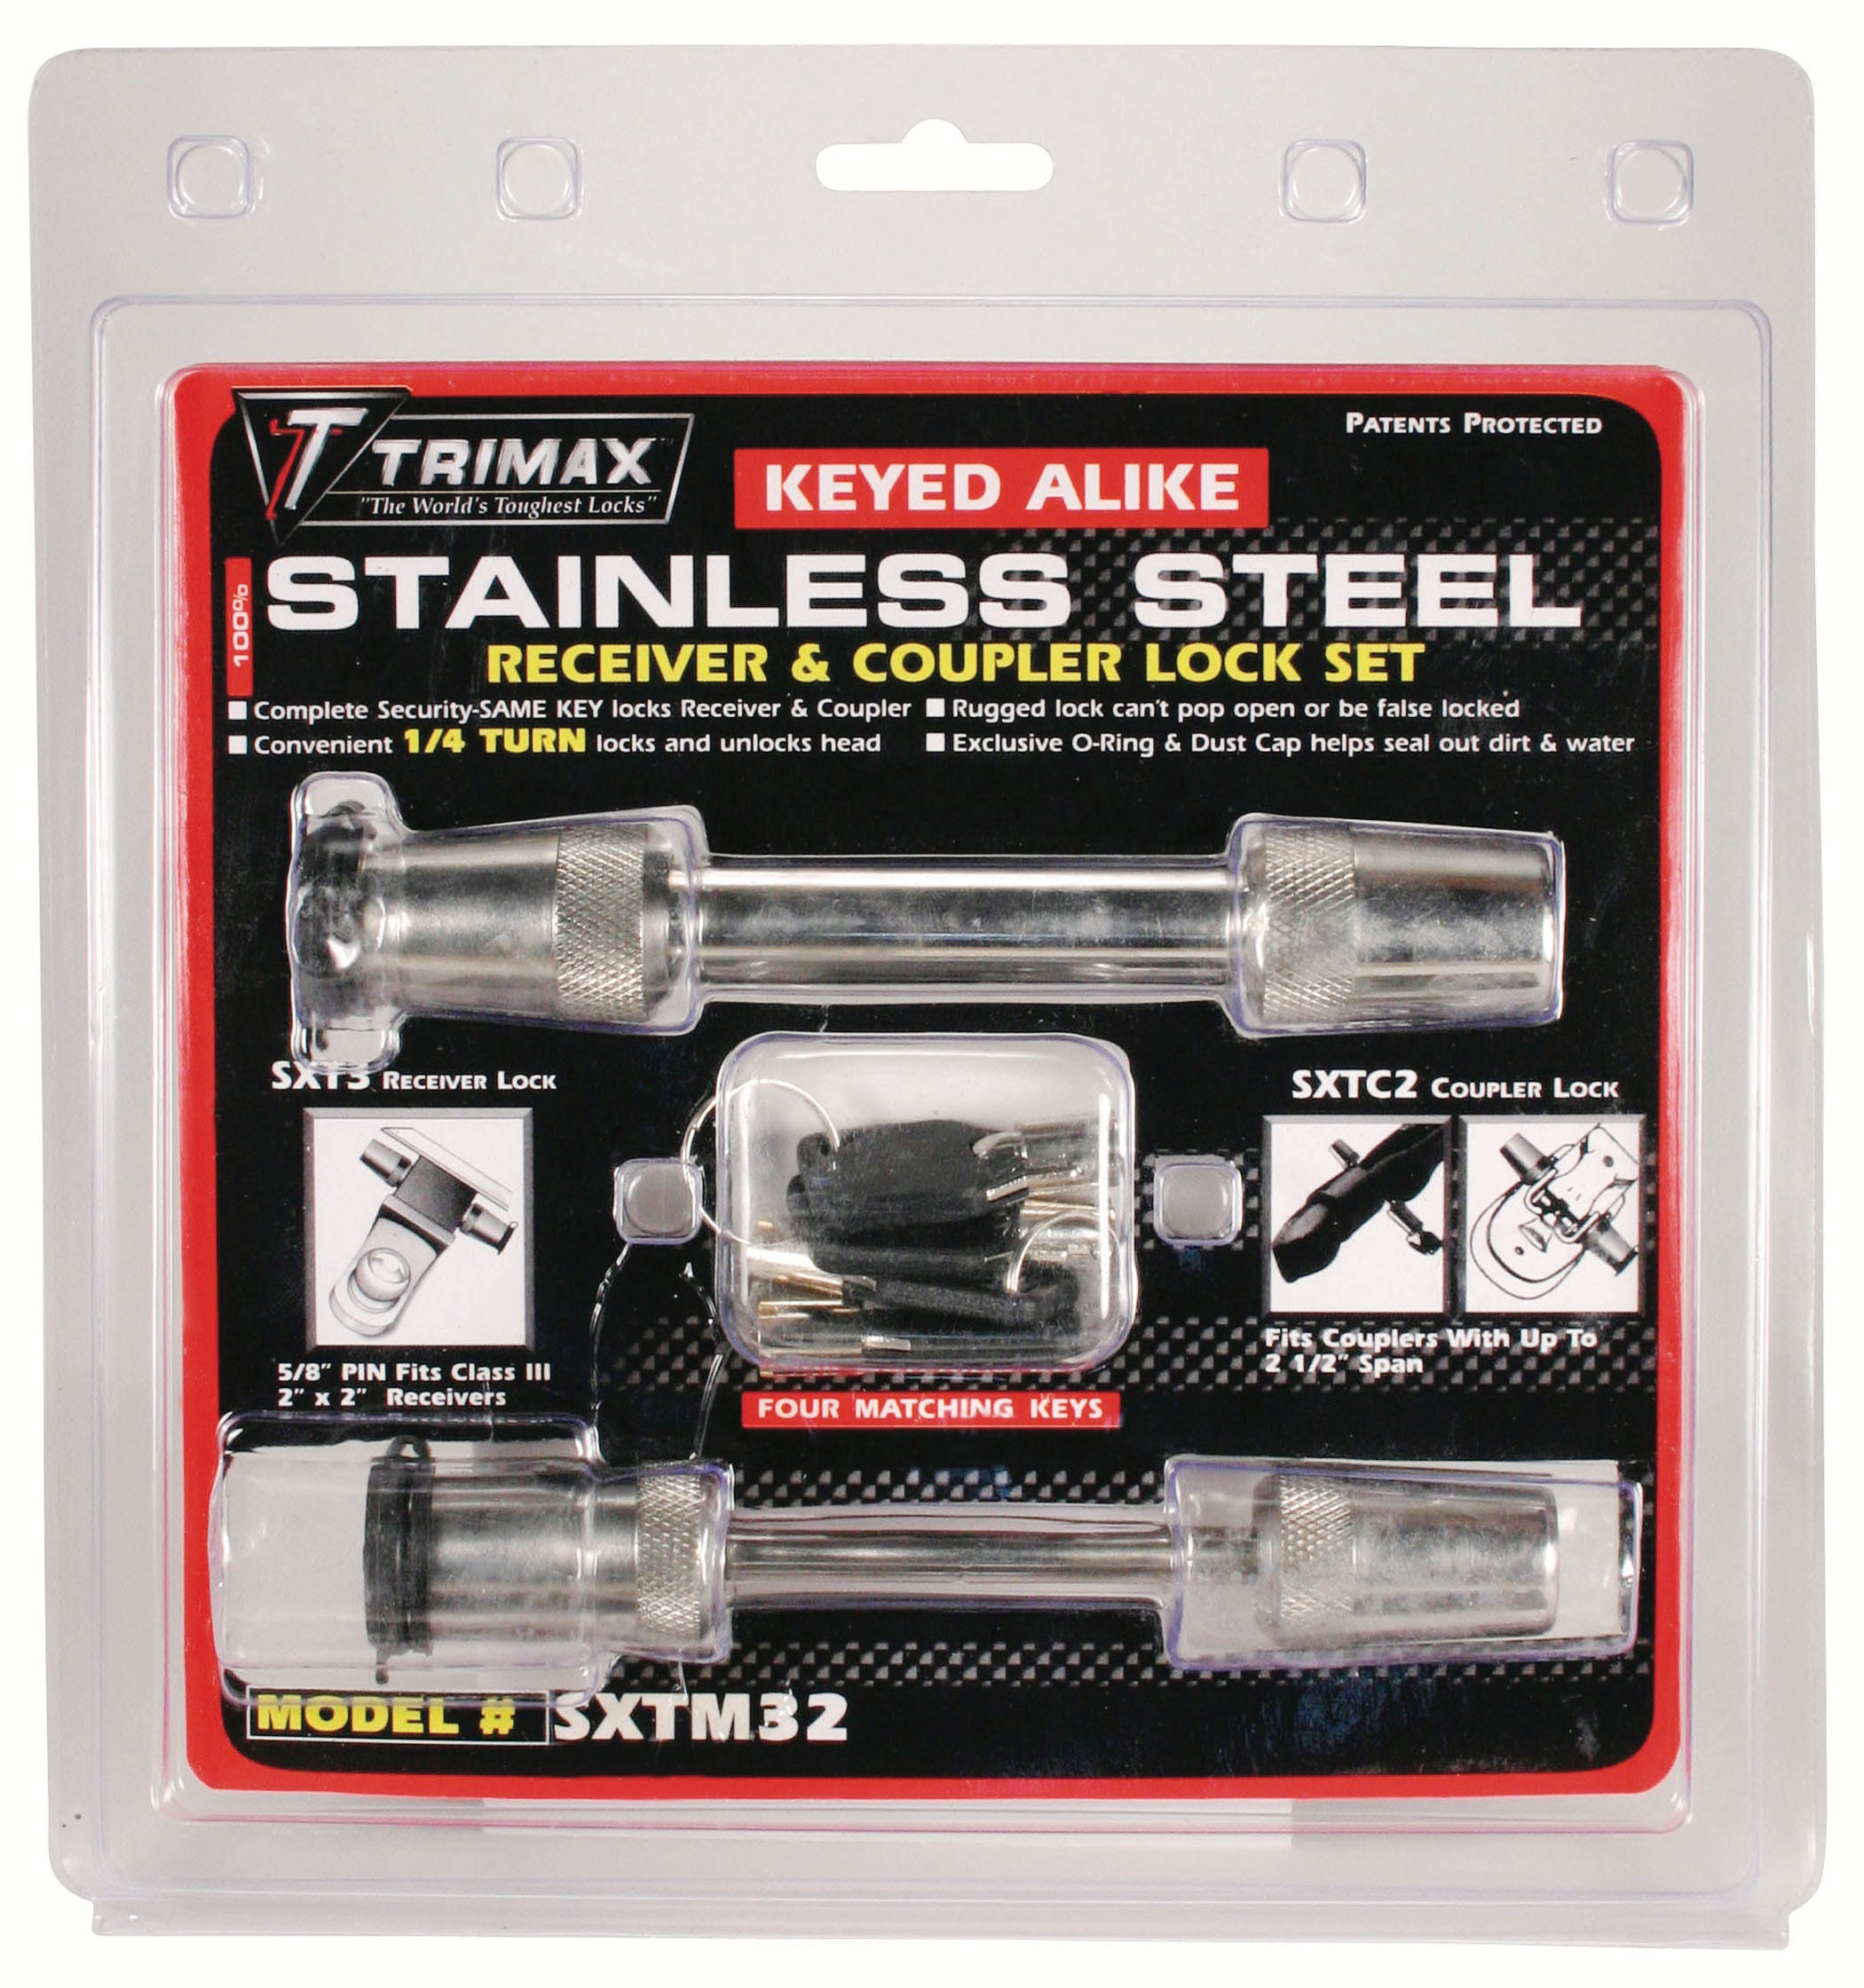 TRIMAX SXTM32 Stainless Steel 2-1/2 inch and 5/8 inch Kit